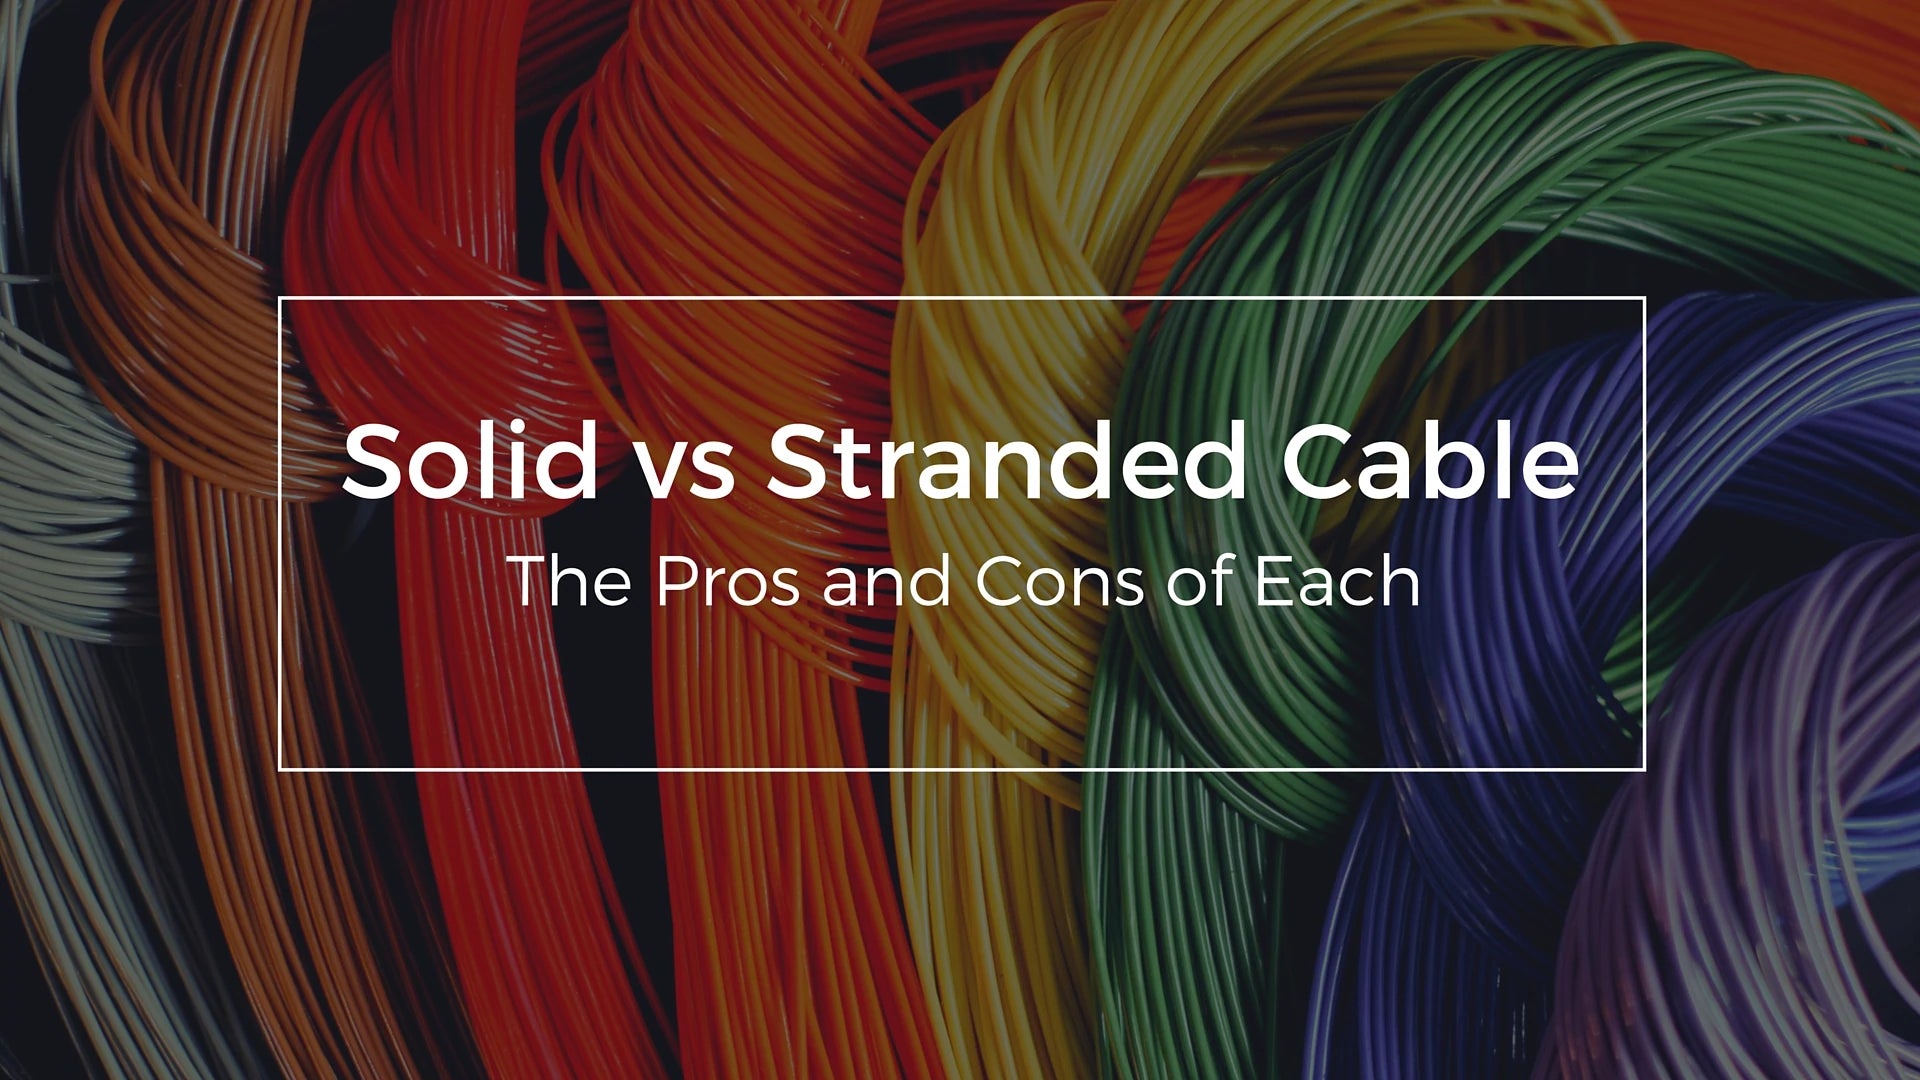 Solid vs Stranded Cable - The Pros and Cons of Each